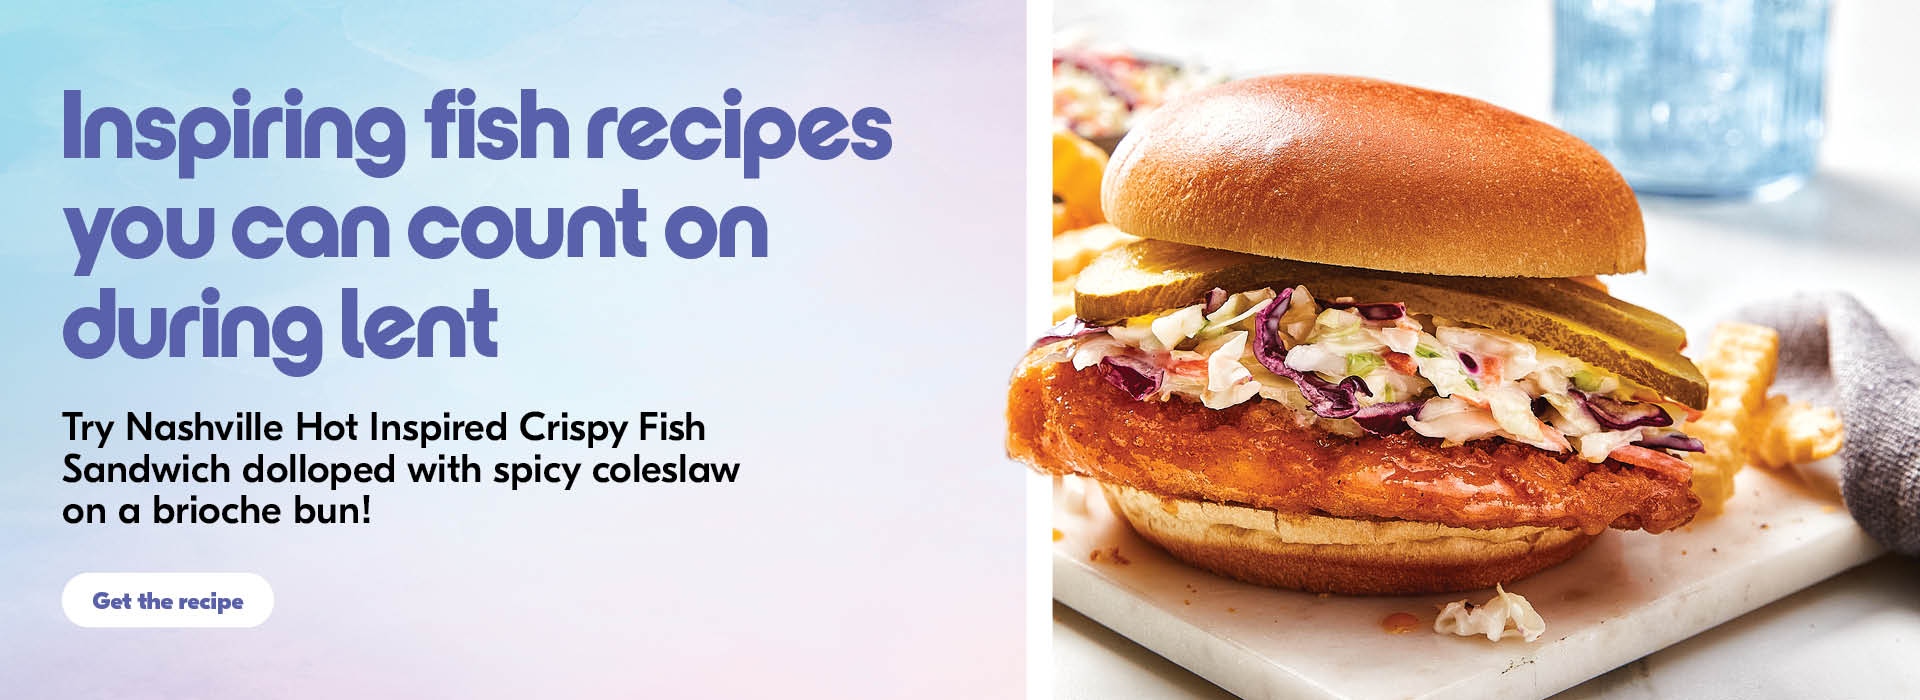 The following image contains the text, " Inspiring fish recipes you can count on during Lent, Try Nashville hot inspired crispy fish sandwich dolloped with spicy coleslaw on a brioche bun! Along with the Get the recipe button."